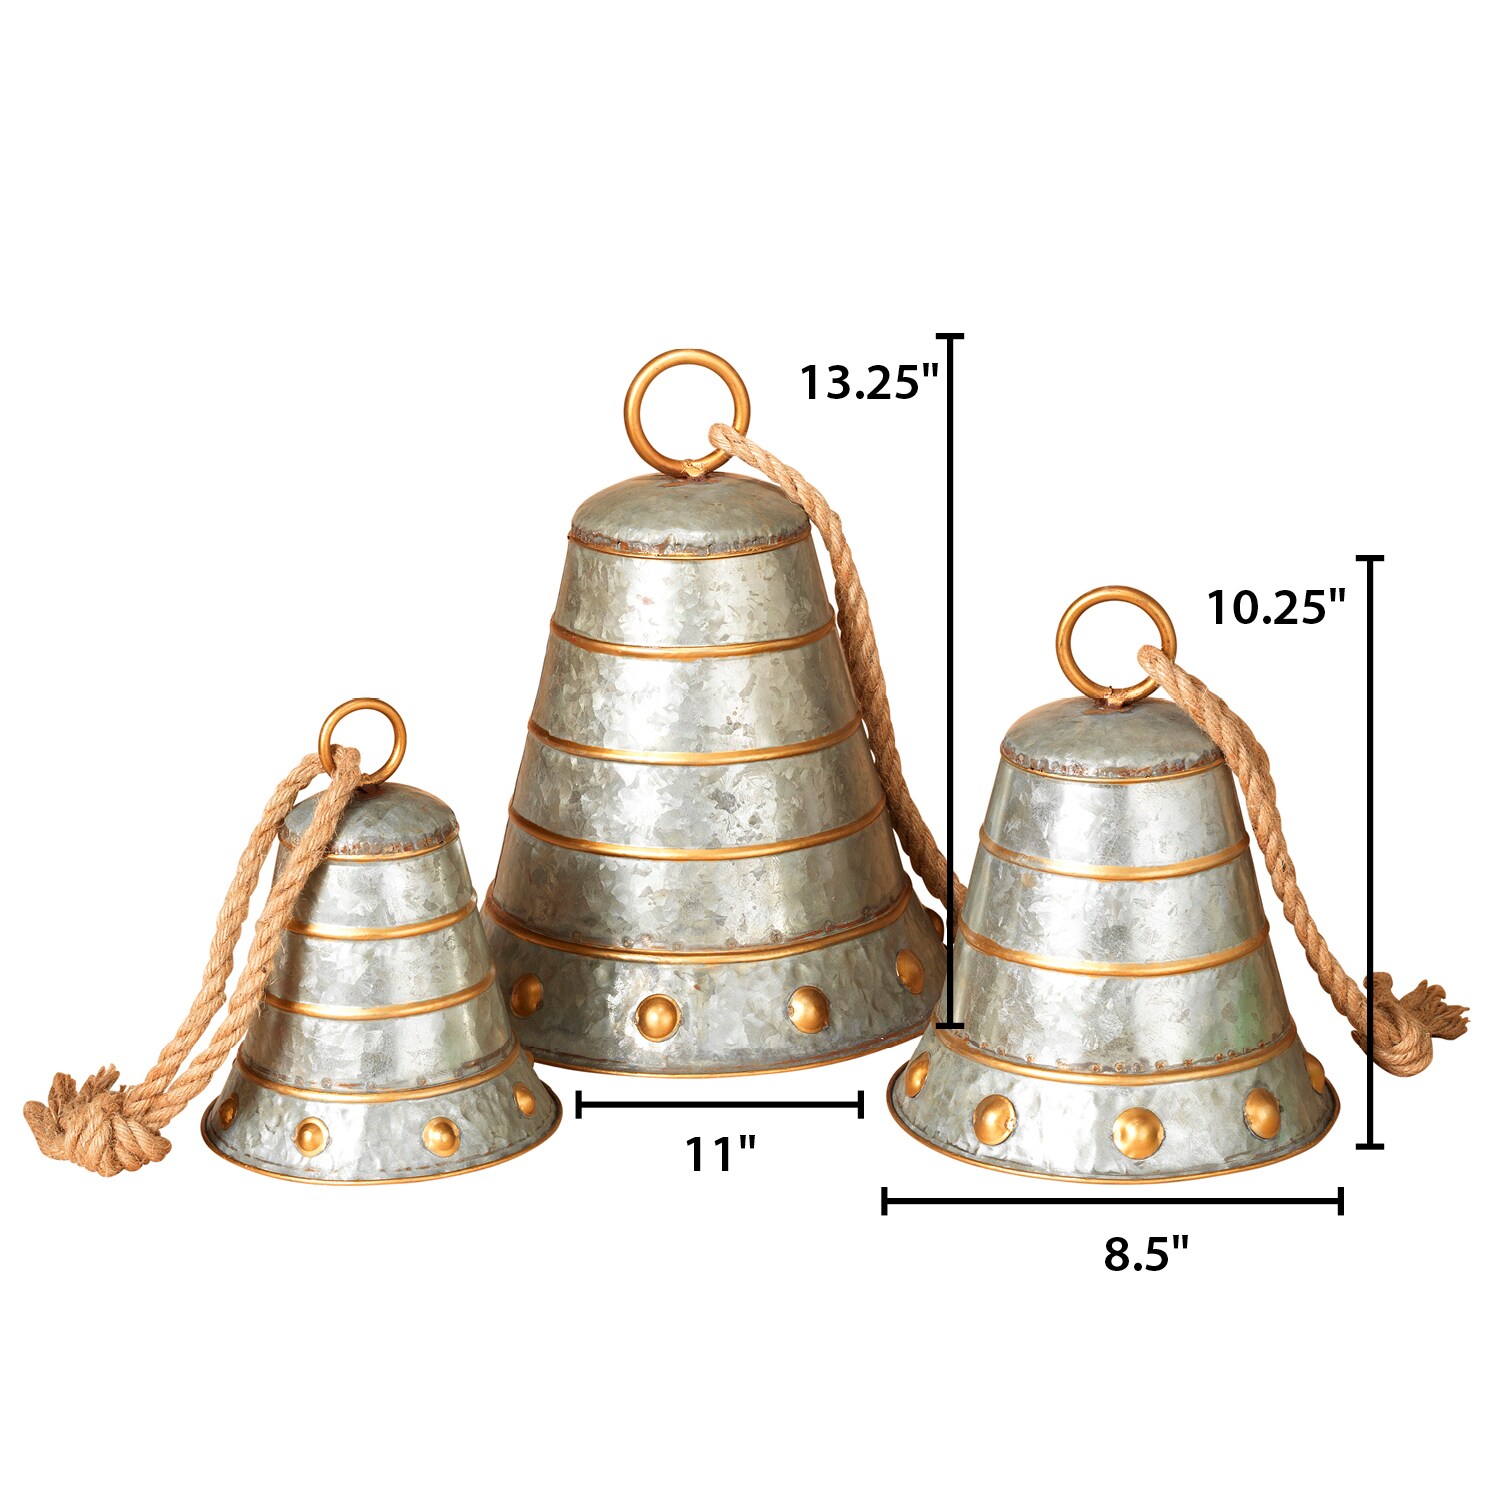 1.5 Assorted Brass Bells  Elegant Decorative Accents for Home & Office -  Dozen on